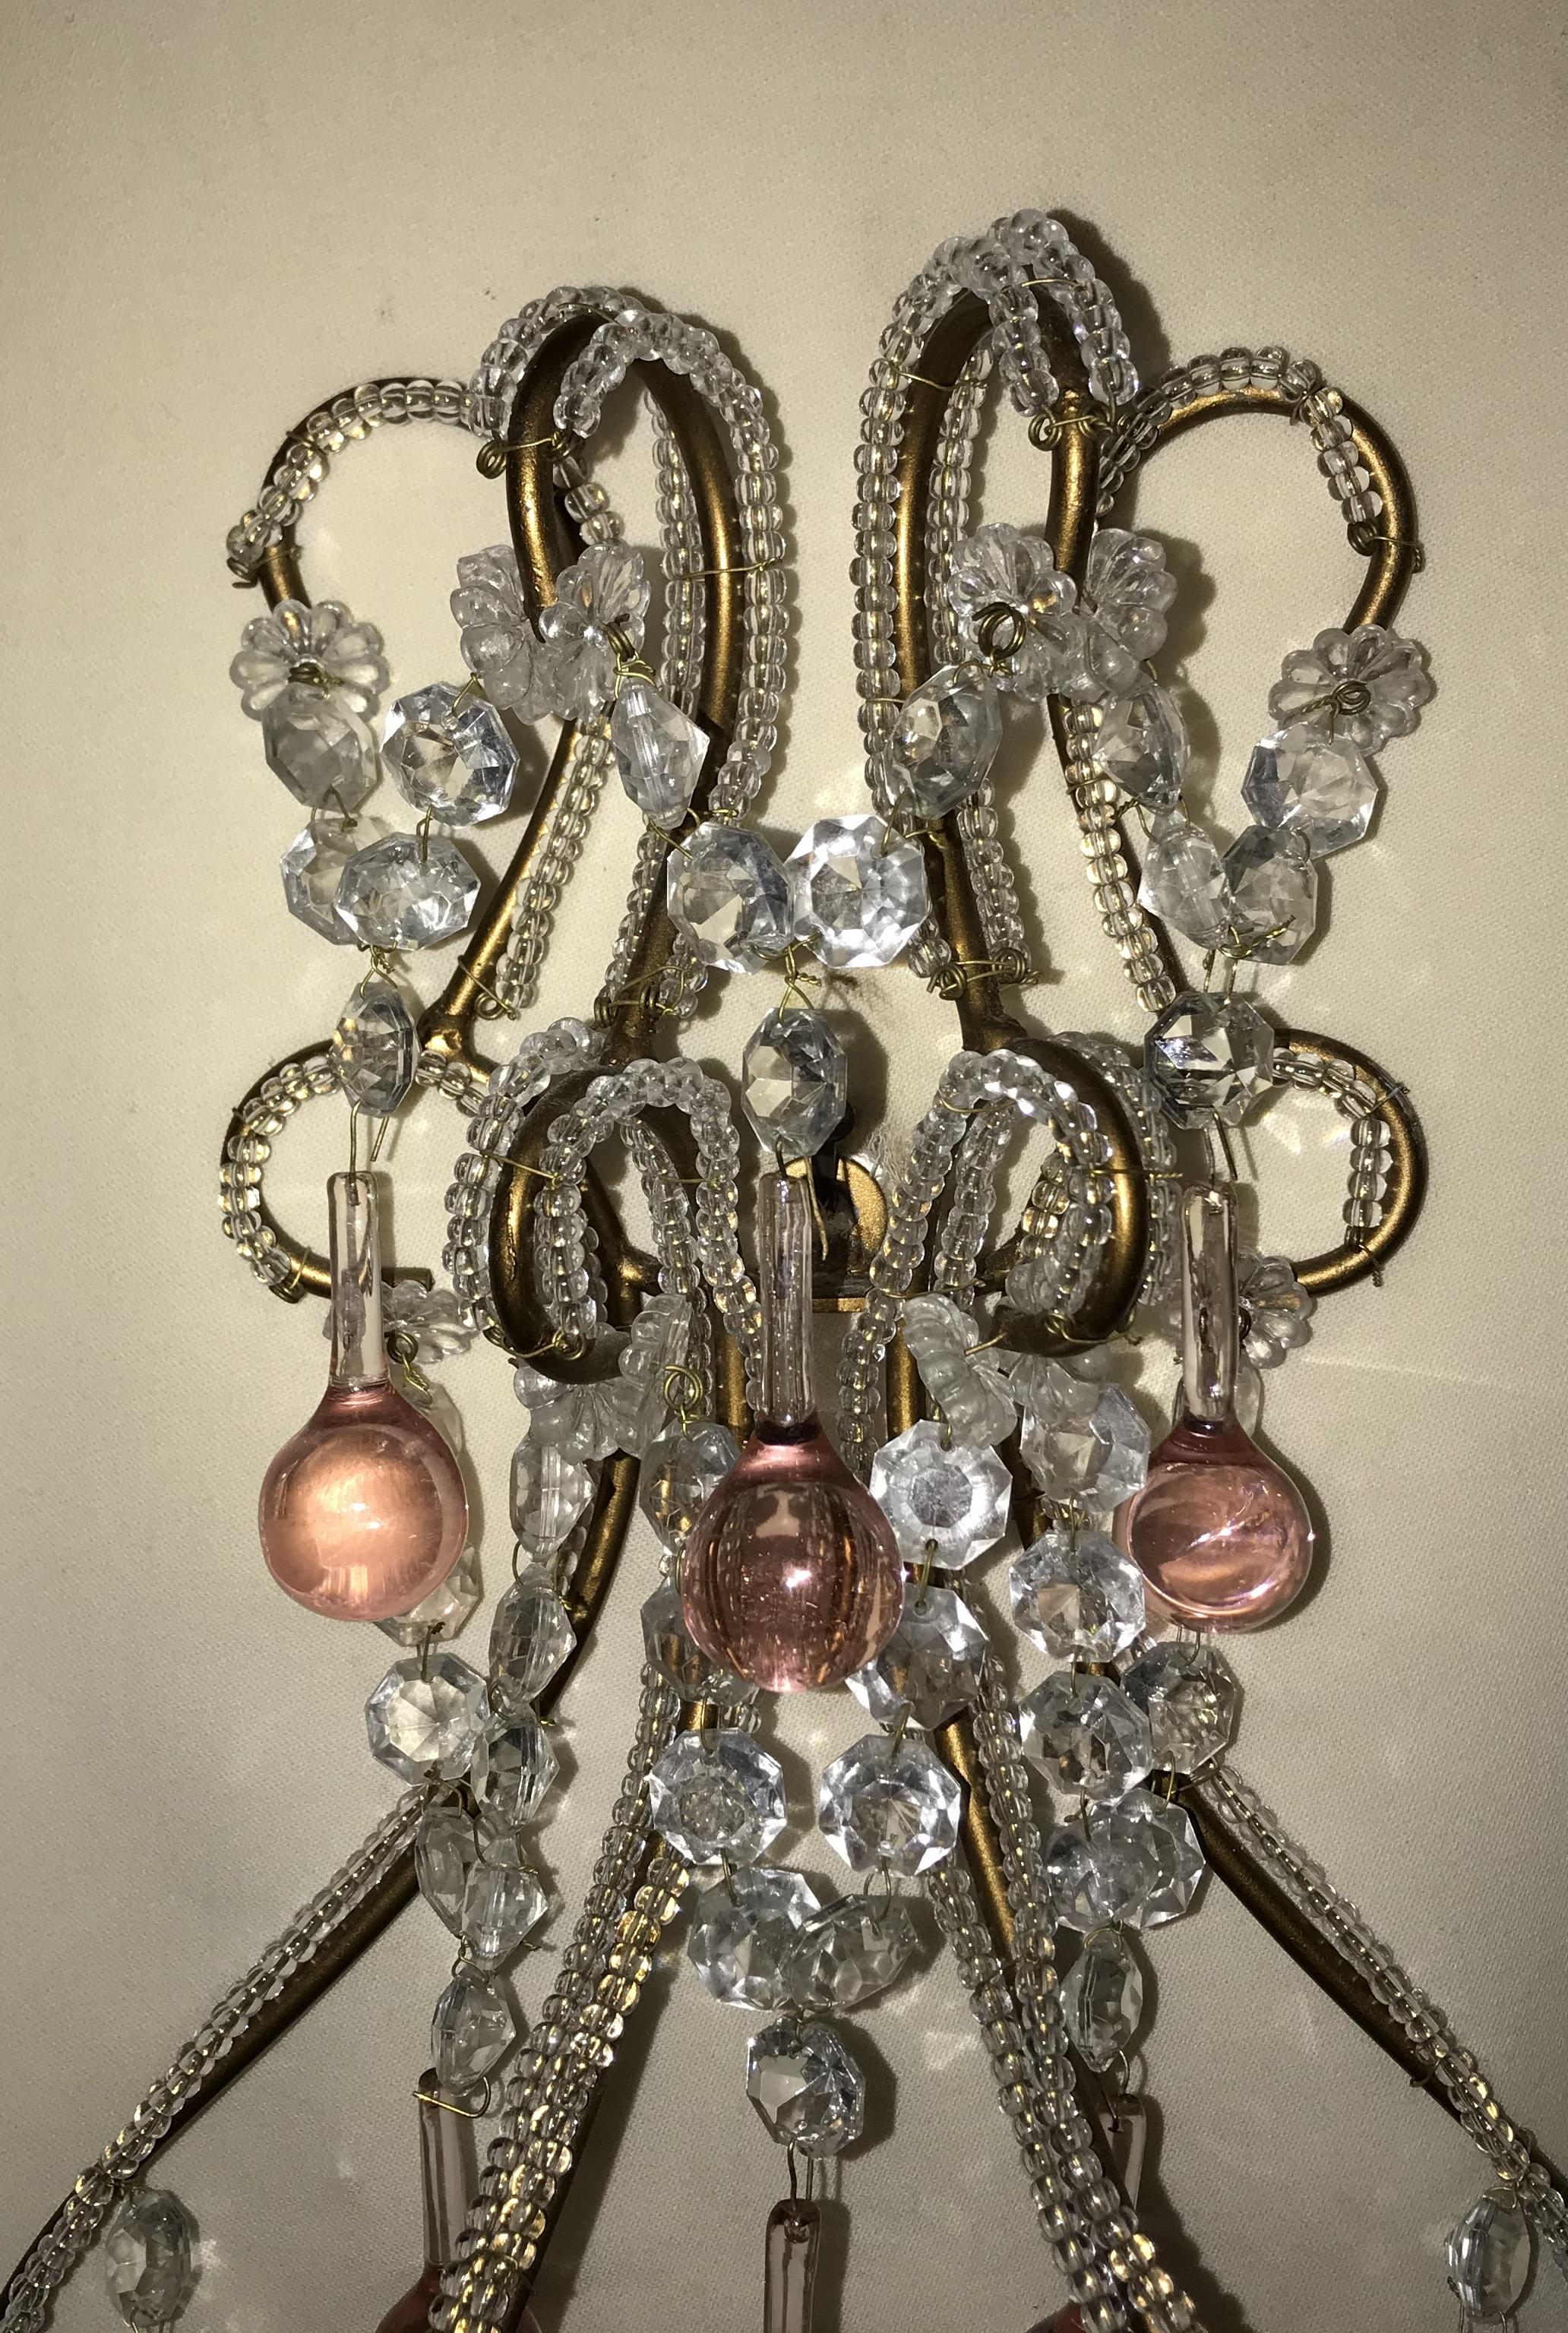 A Wonderful pair of fine beaded Italian two-light crystal sconces with pink colored crystal drops. Minor wear to gilding, some of the beads and crystals have been reattached but still retain the look of old. Completely rewired and ready to install